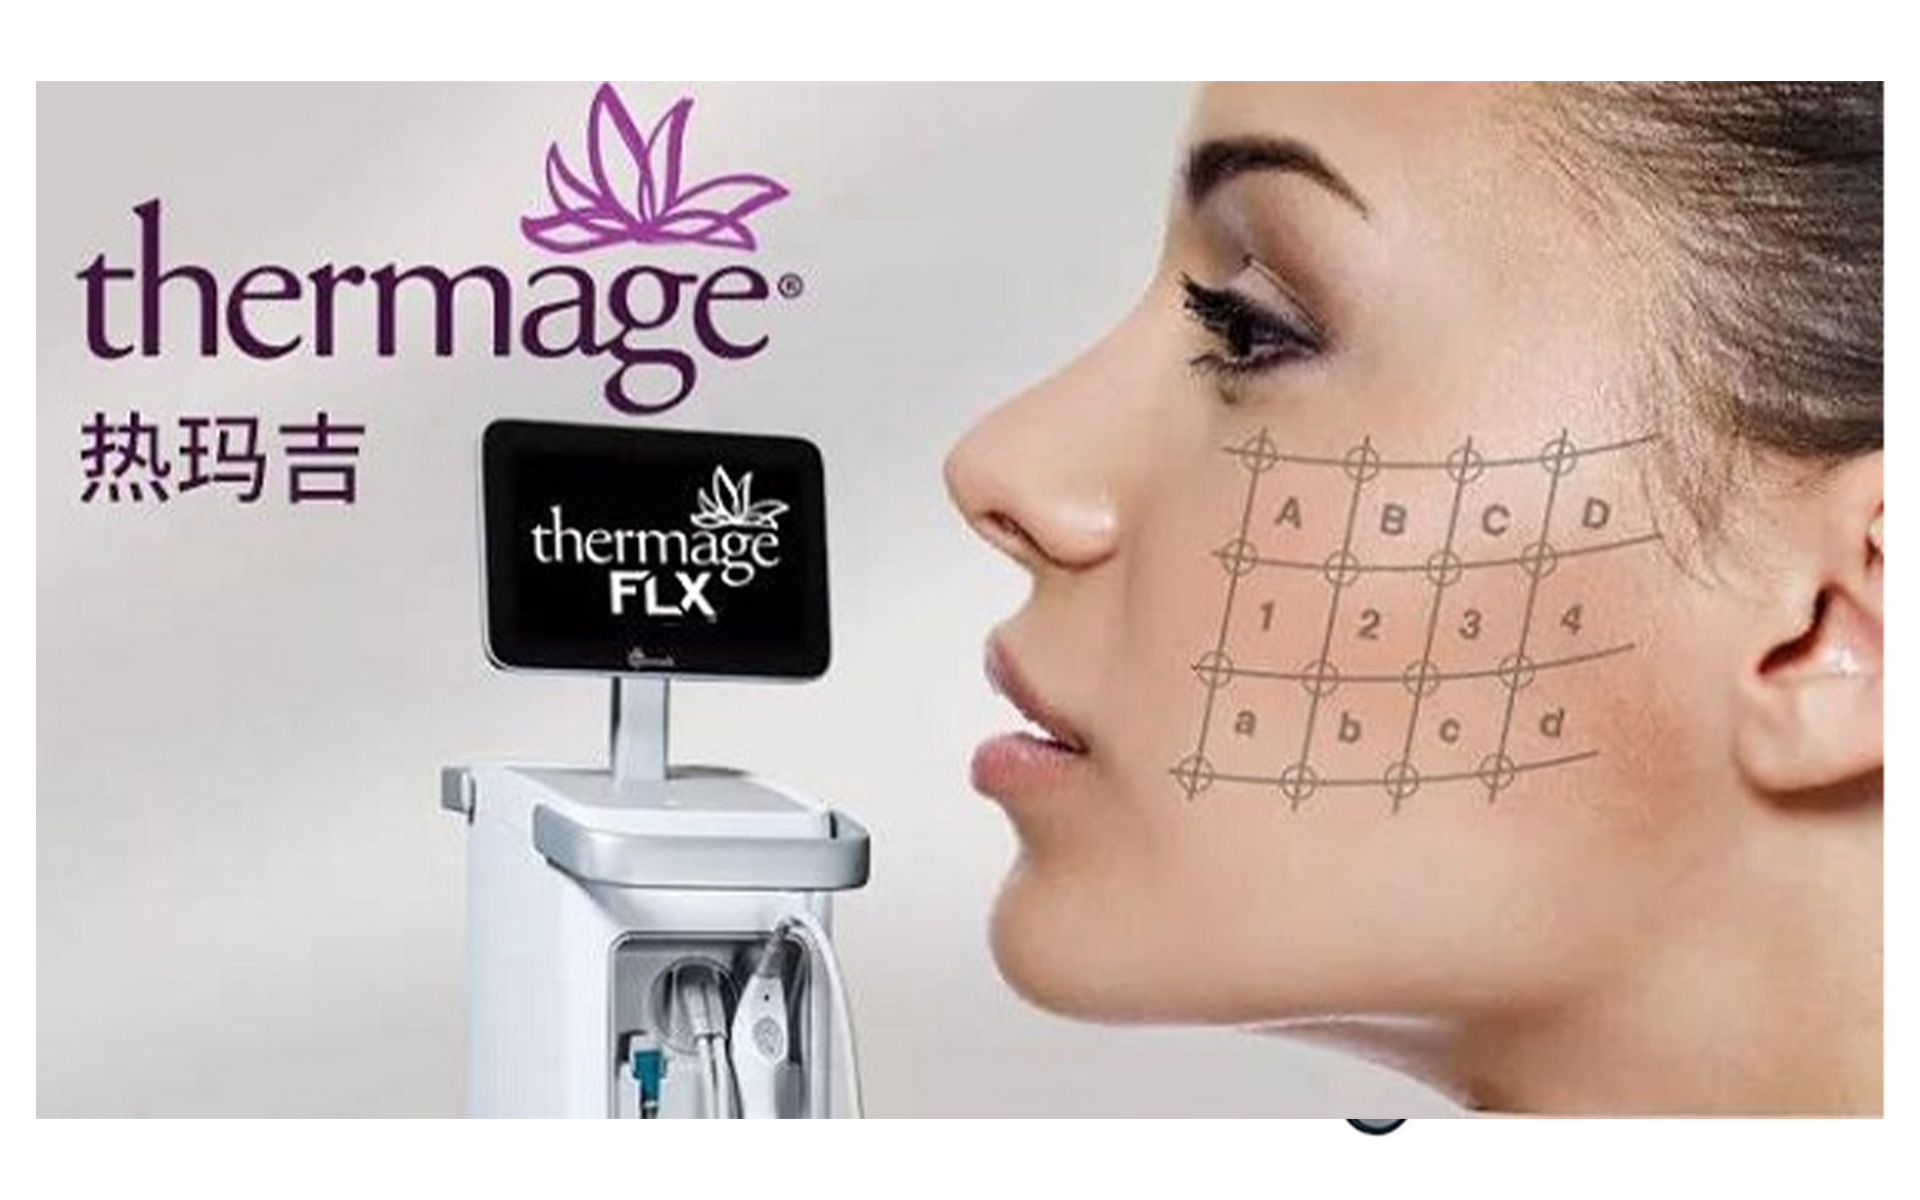 Thermage, Aesthetic Treatment